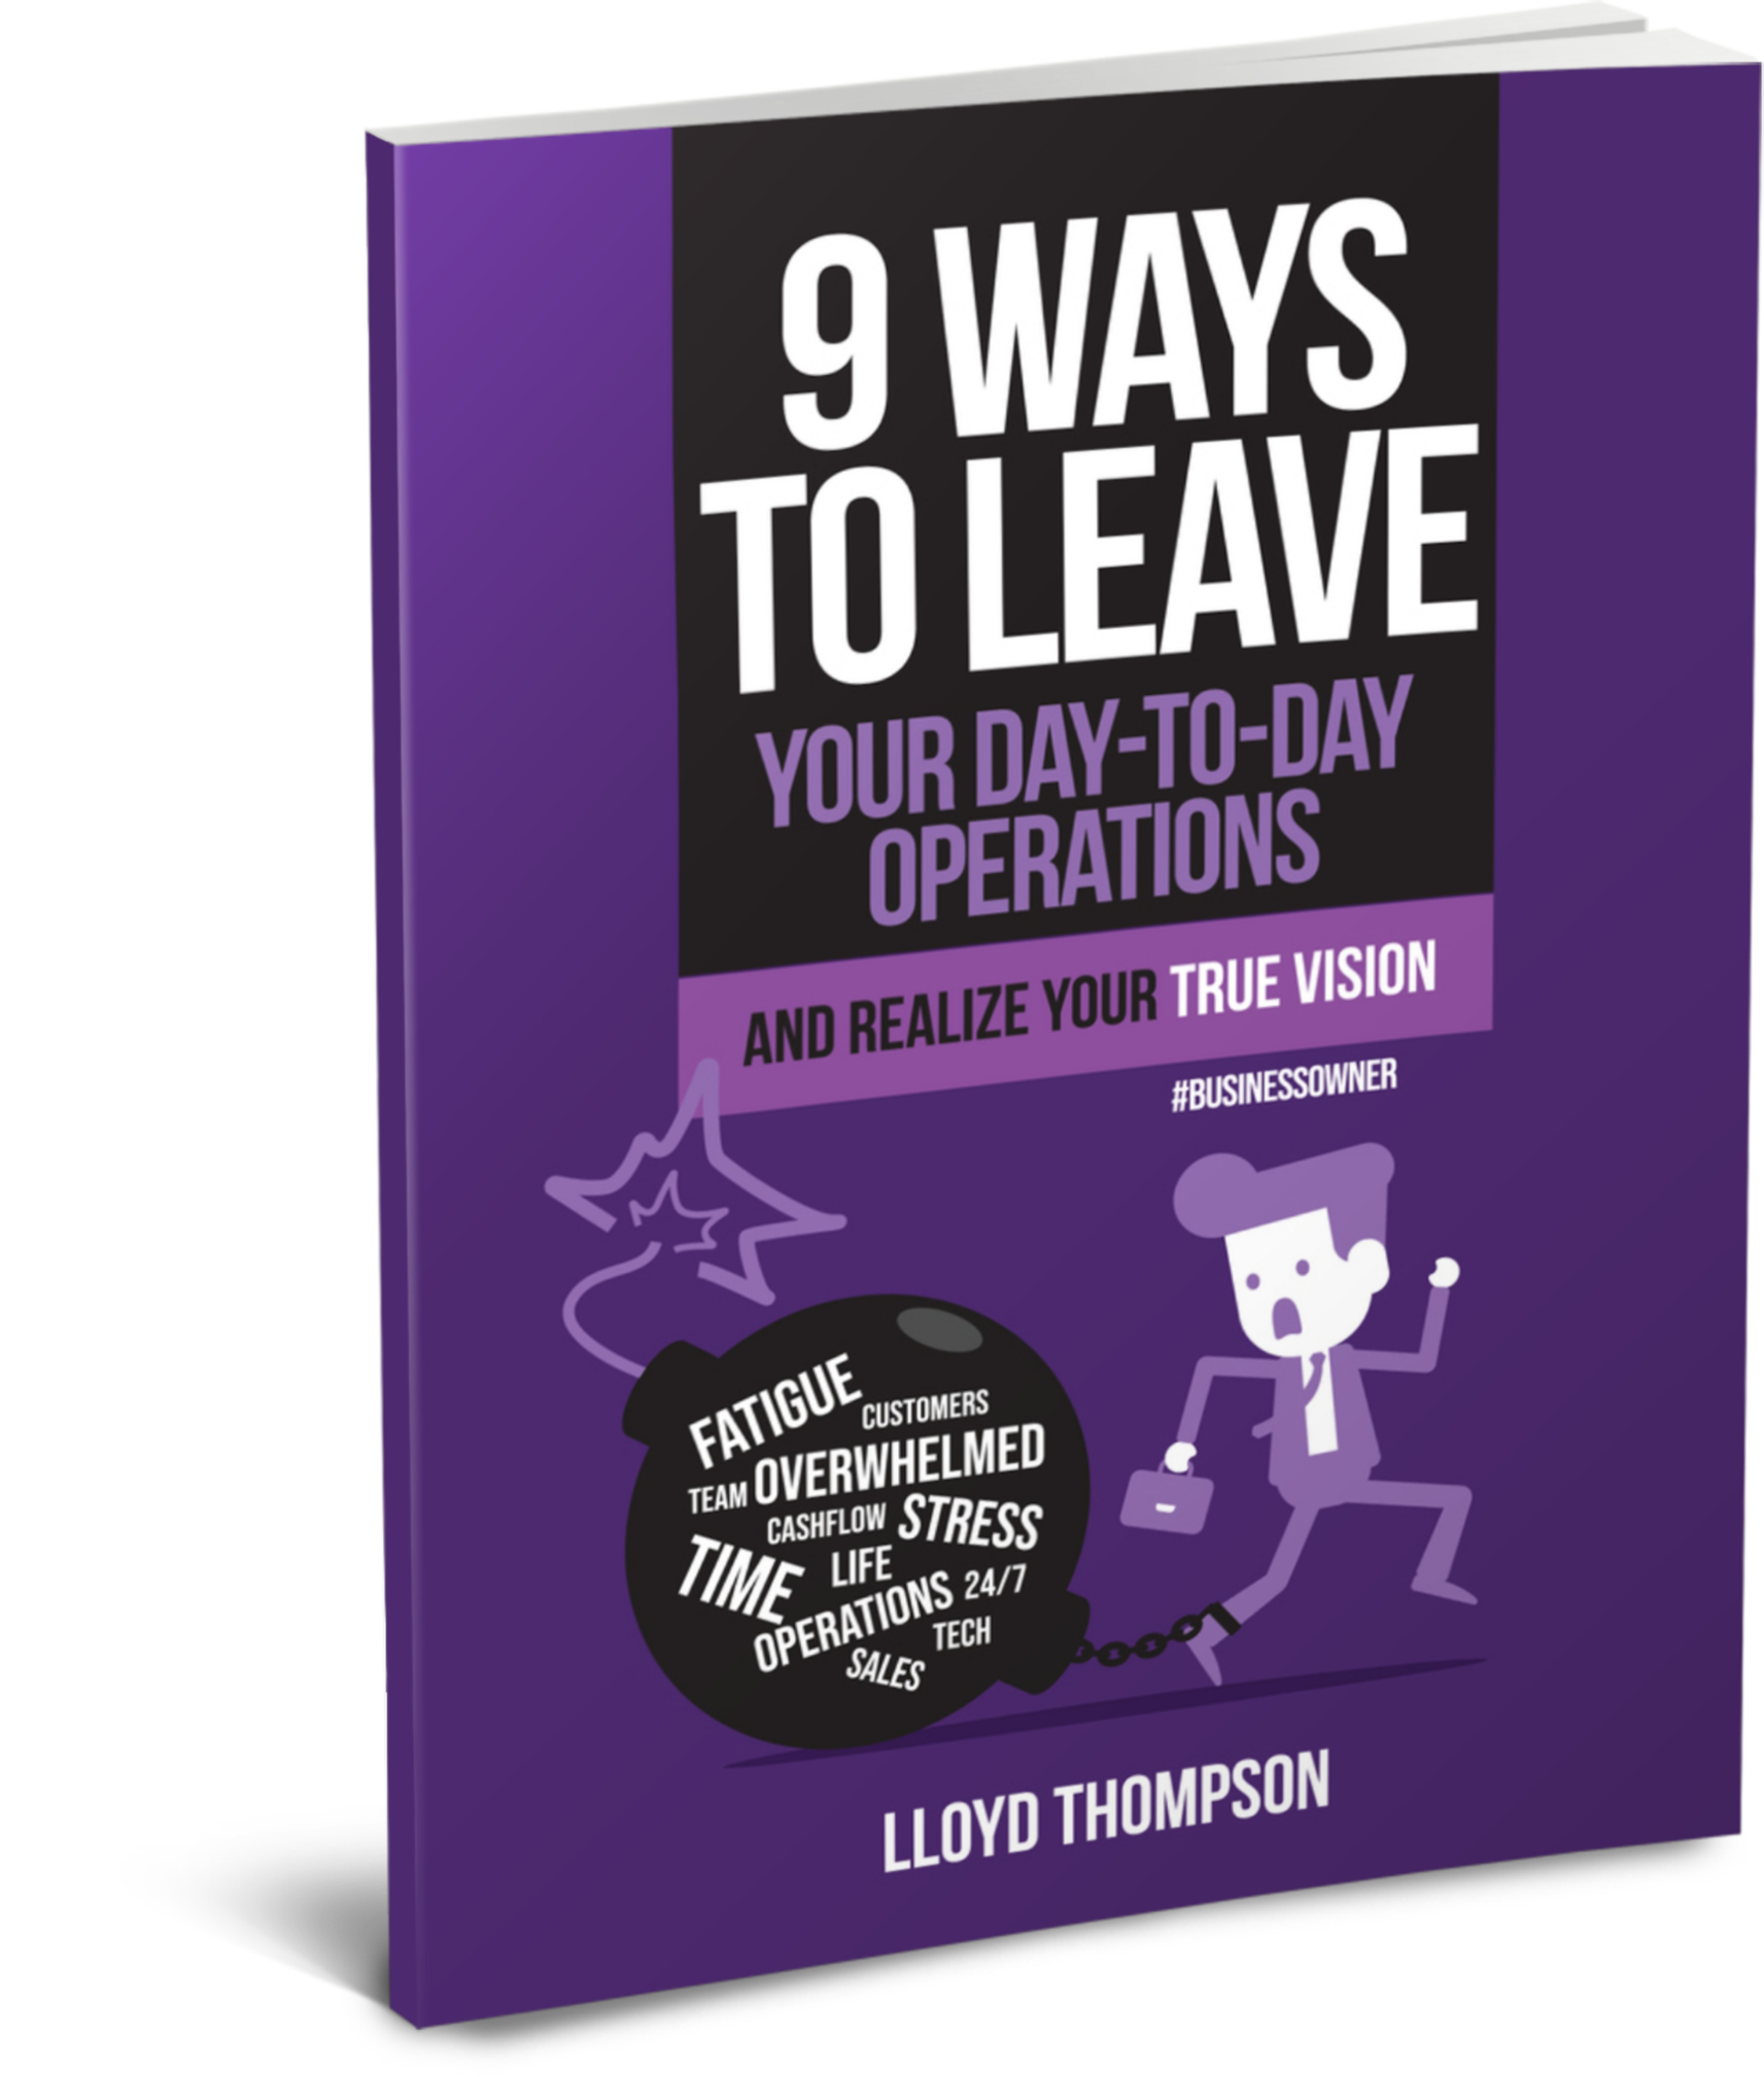   9 Ways To Leave Your Day to Day Operation   Lloyd’s book, 9-Ways to Leave Your Day-to-Day Operations', an introduction to the idea that companies of all sizes can benefit from operational improvements.    Listen as Lloyd shares how he's using his b